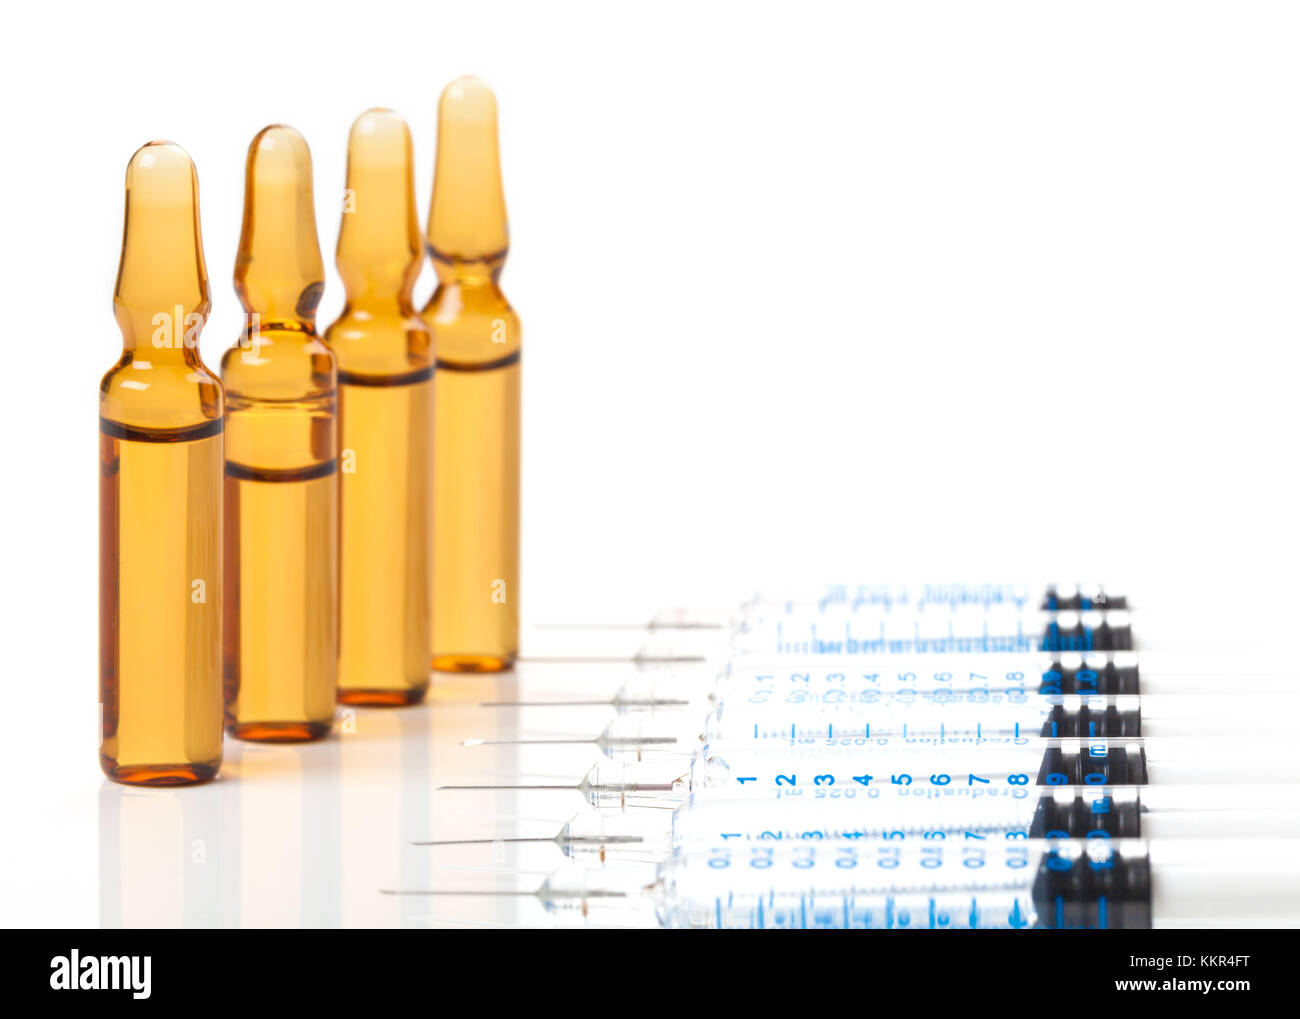 Vaccination, disposable syringes, vials Stock Photo